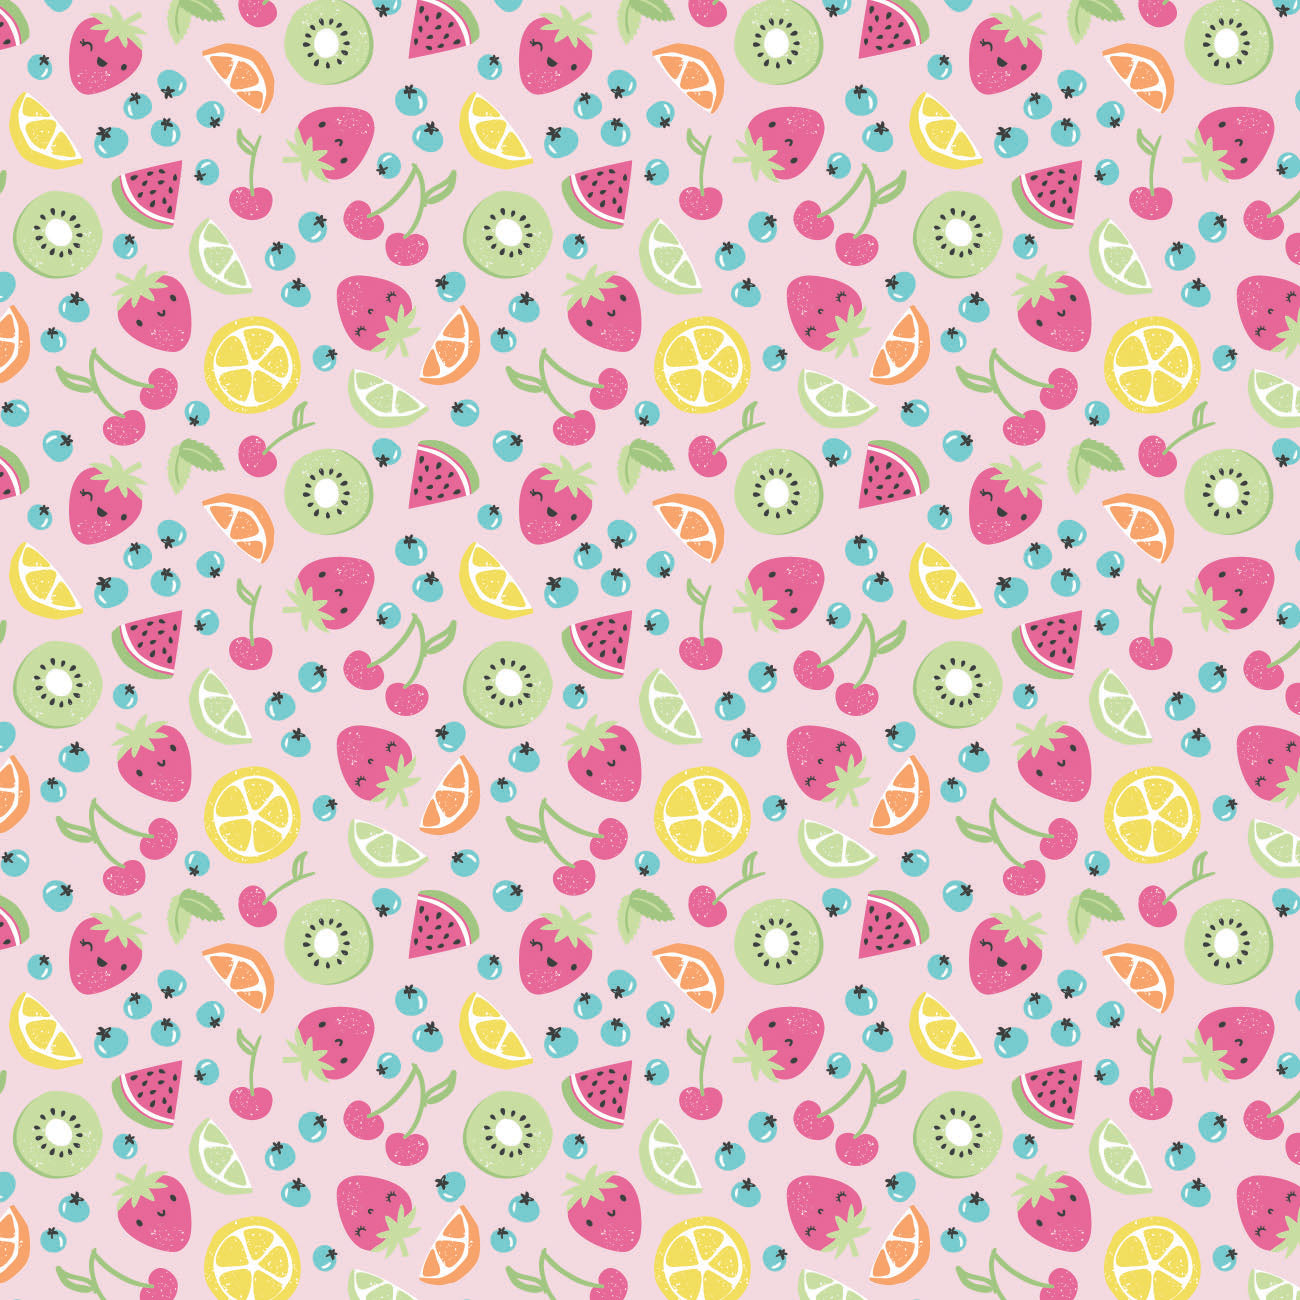 Best-Teas Collection - Fruity - Pink - Cotton 89221007-02